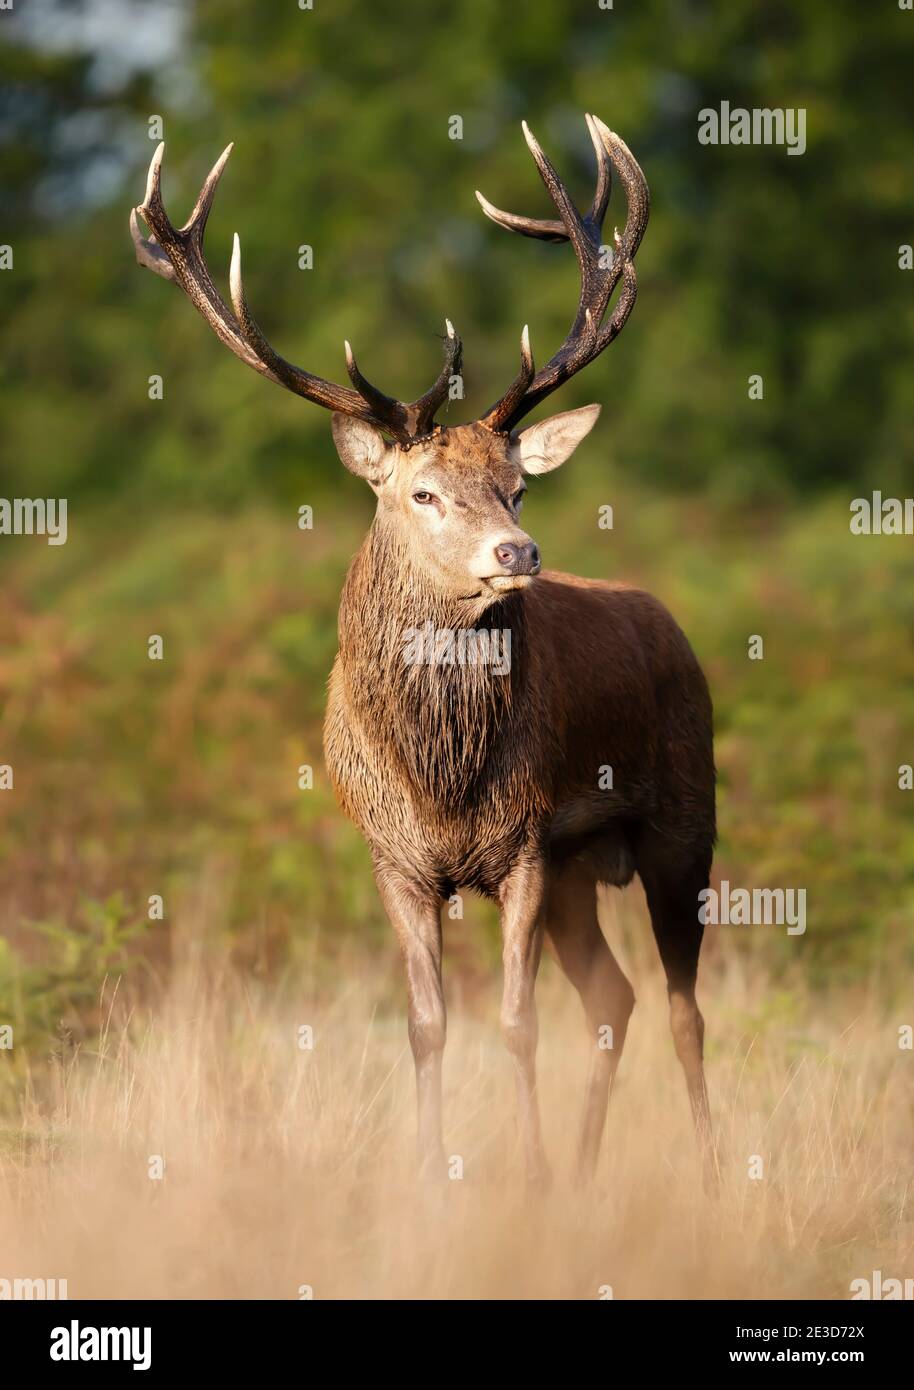 Close-up of a red deer stag standing in a field during rutting season in autumn, UK. Stock Photo